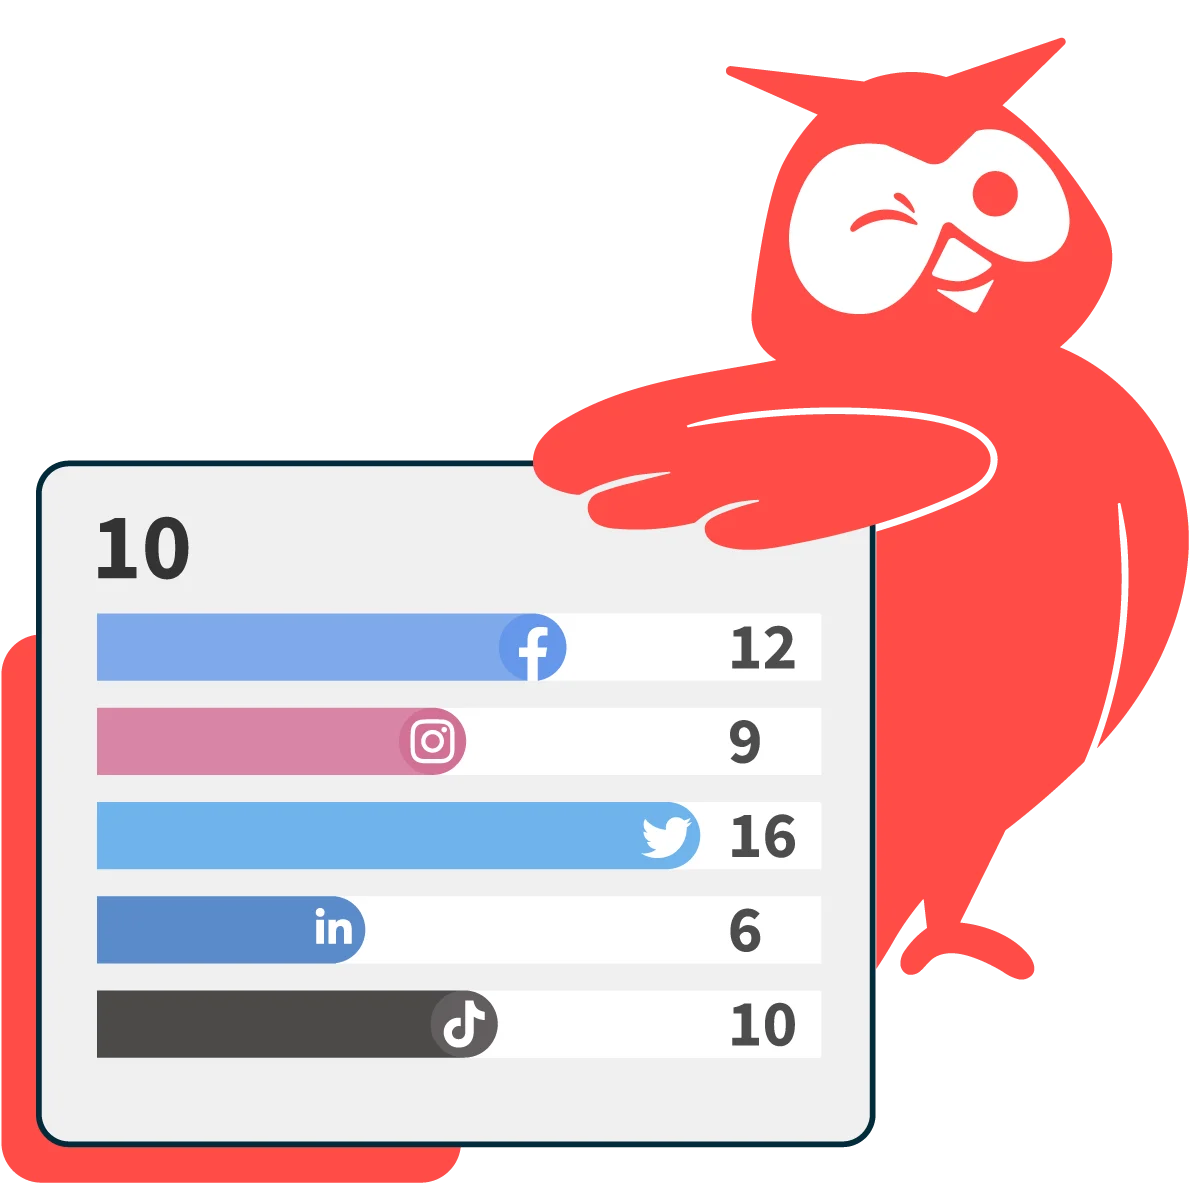 Owly standing next to social network analytics 